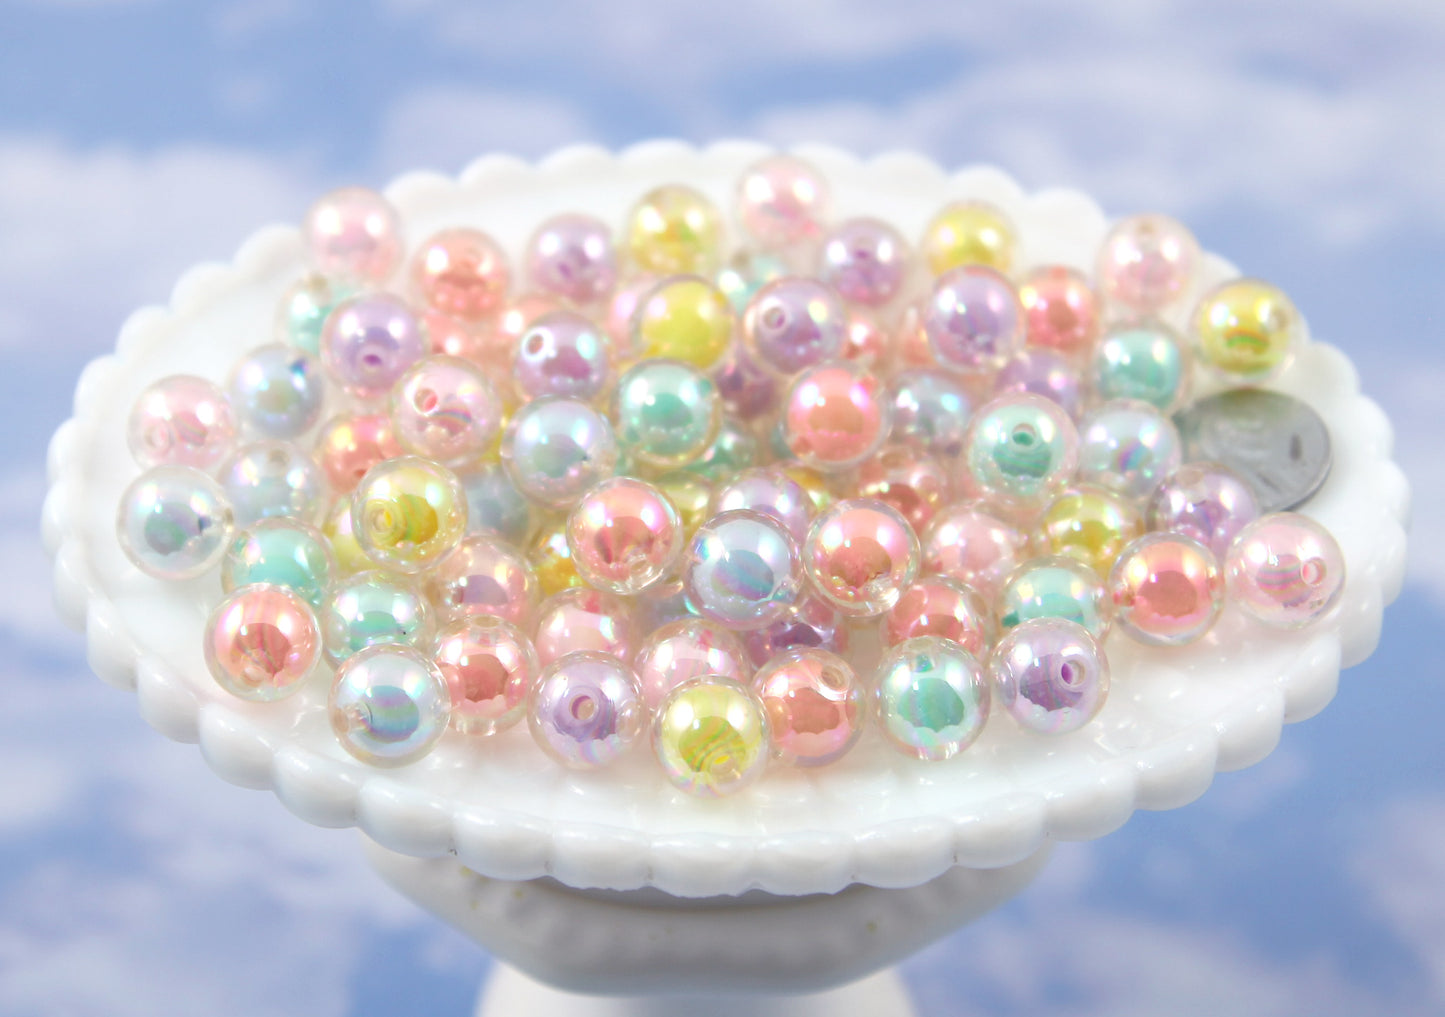 Pastel Beads - 8mm Tiny Matte Pastel Double Inner Bead Resin or Acrylic  Beads - 200 pc set